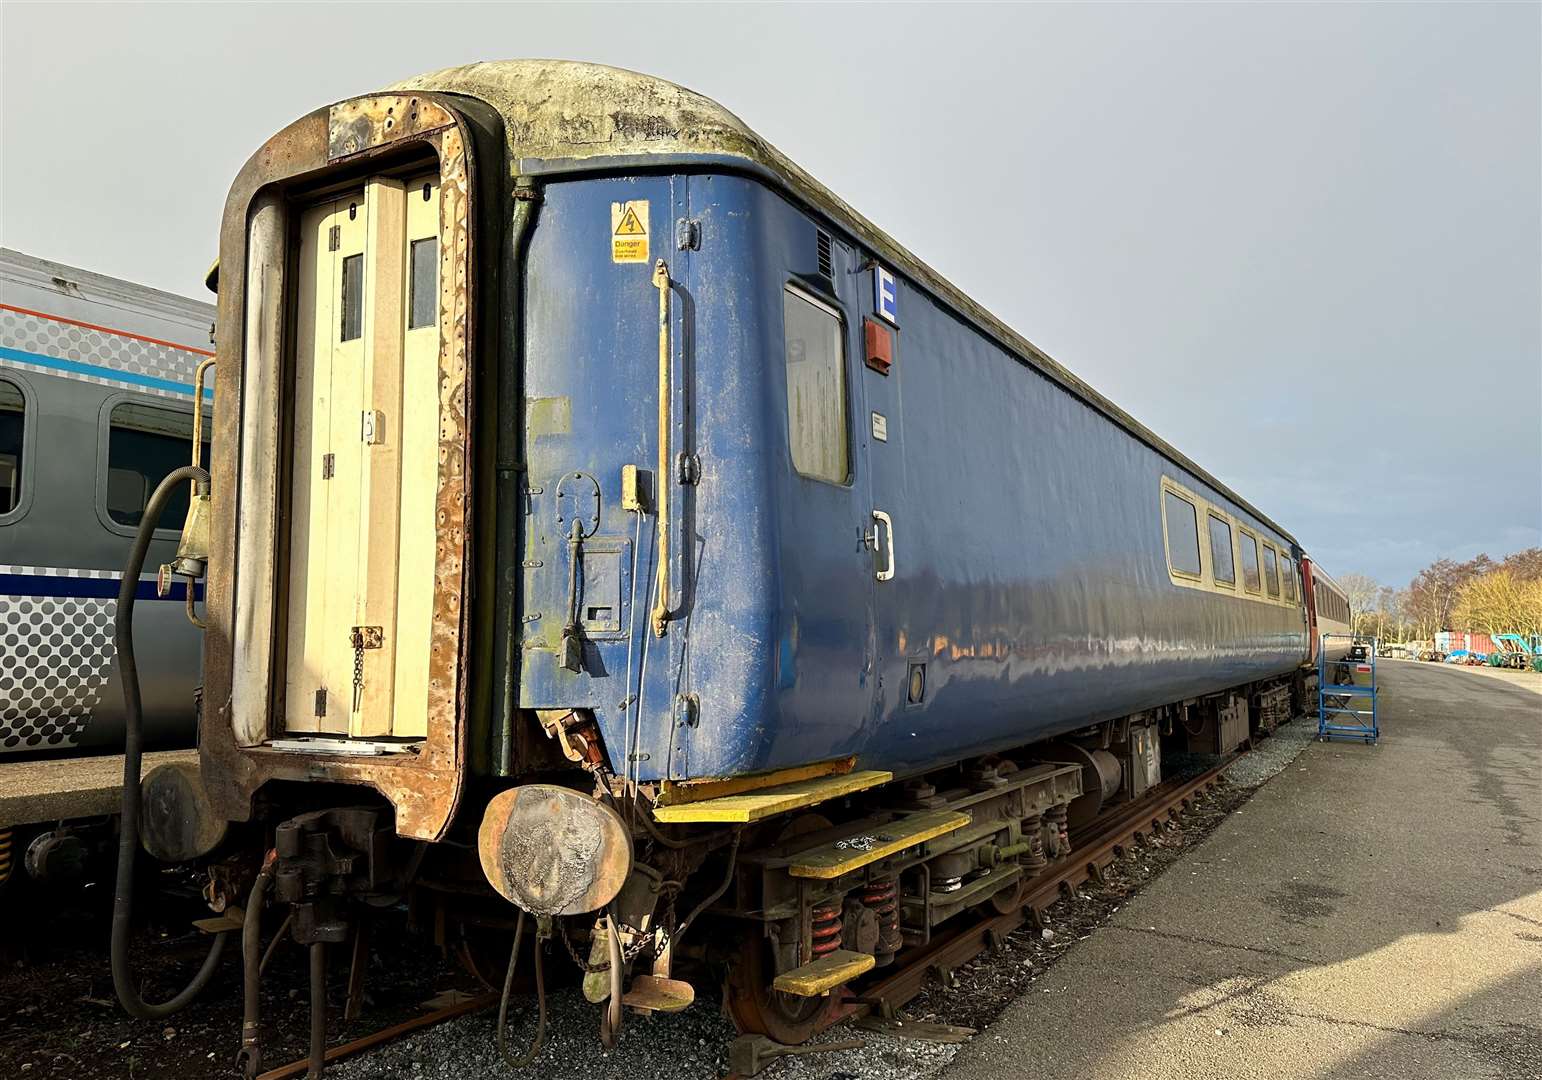 The train carriage destined for Five Acre Wood School in Loose. Picture: Five Acre Wood